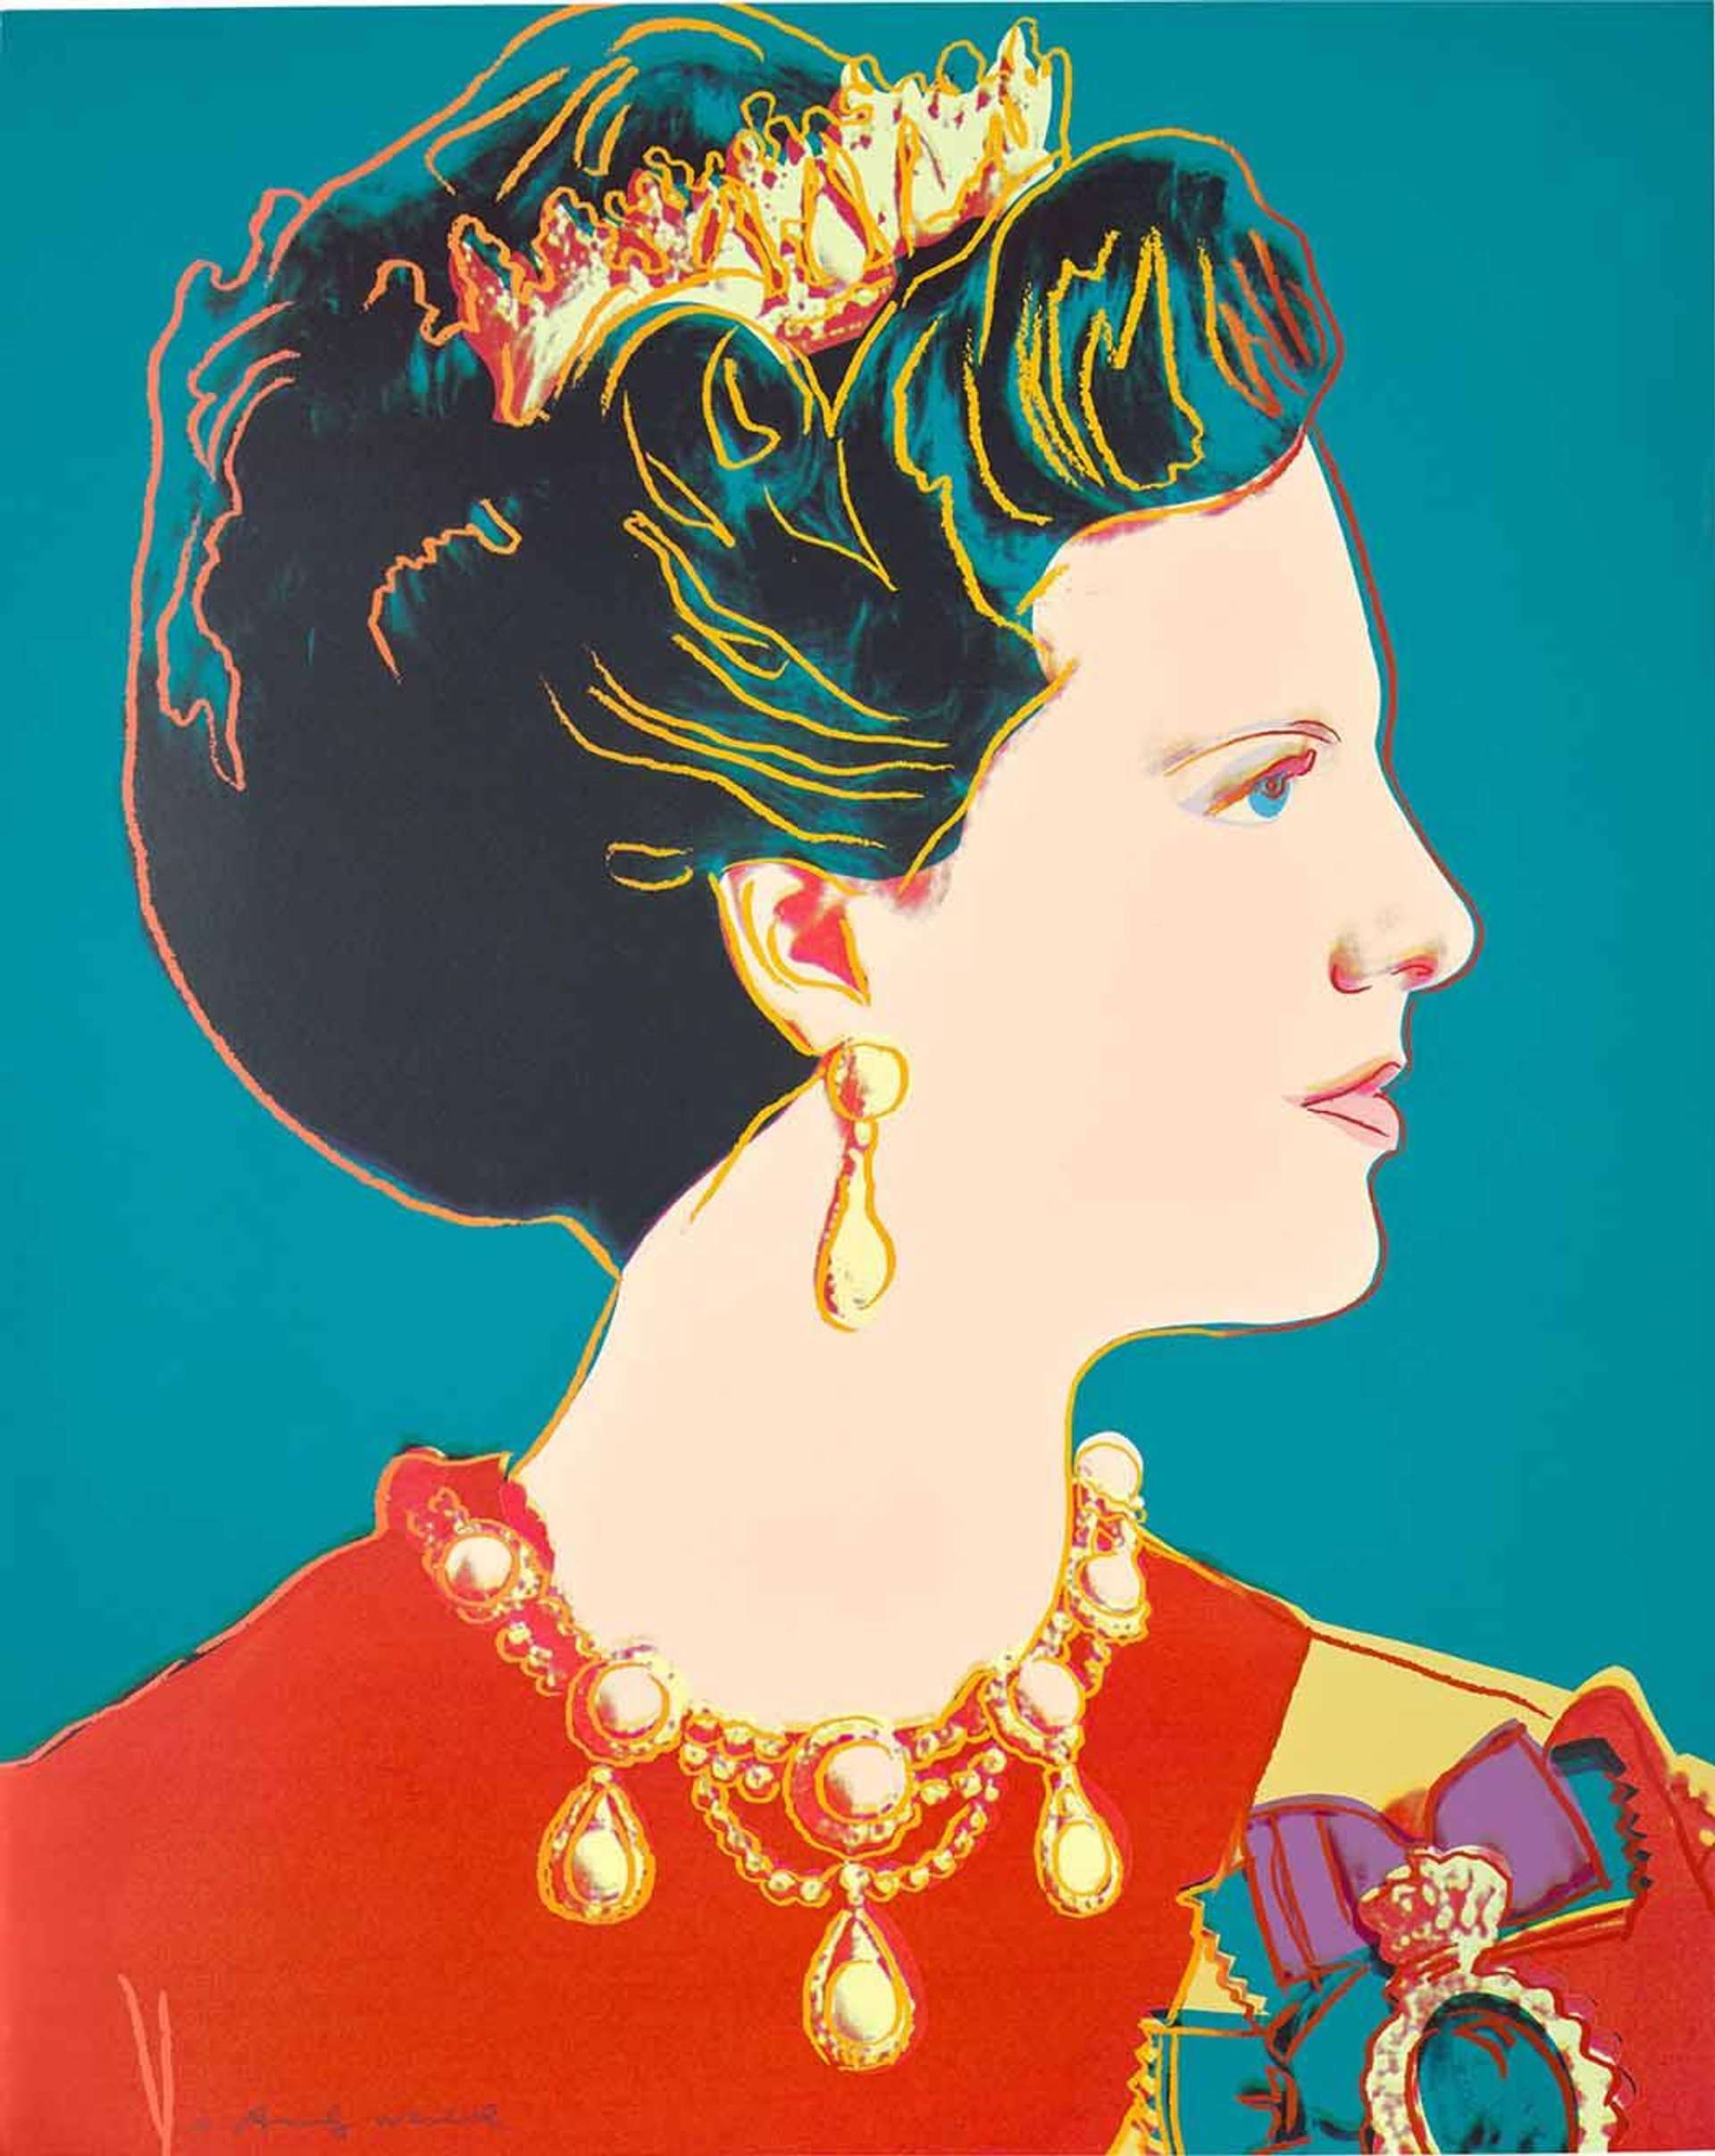 Queen Margrethe Of Denmark (F. & S. II.343) by Andy Warhol